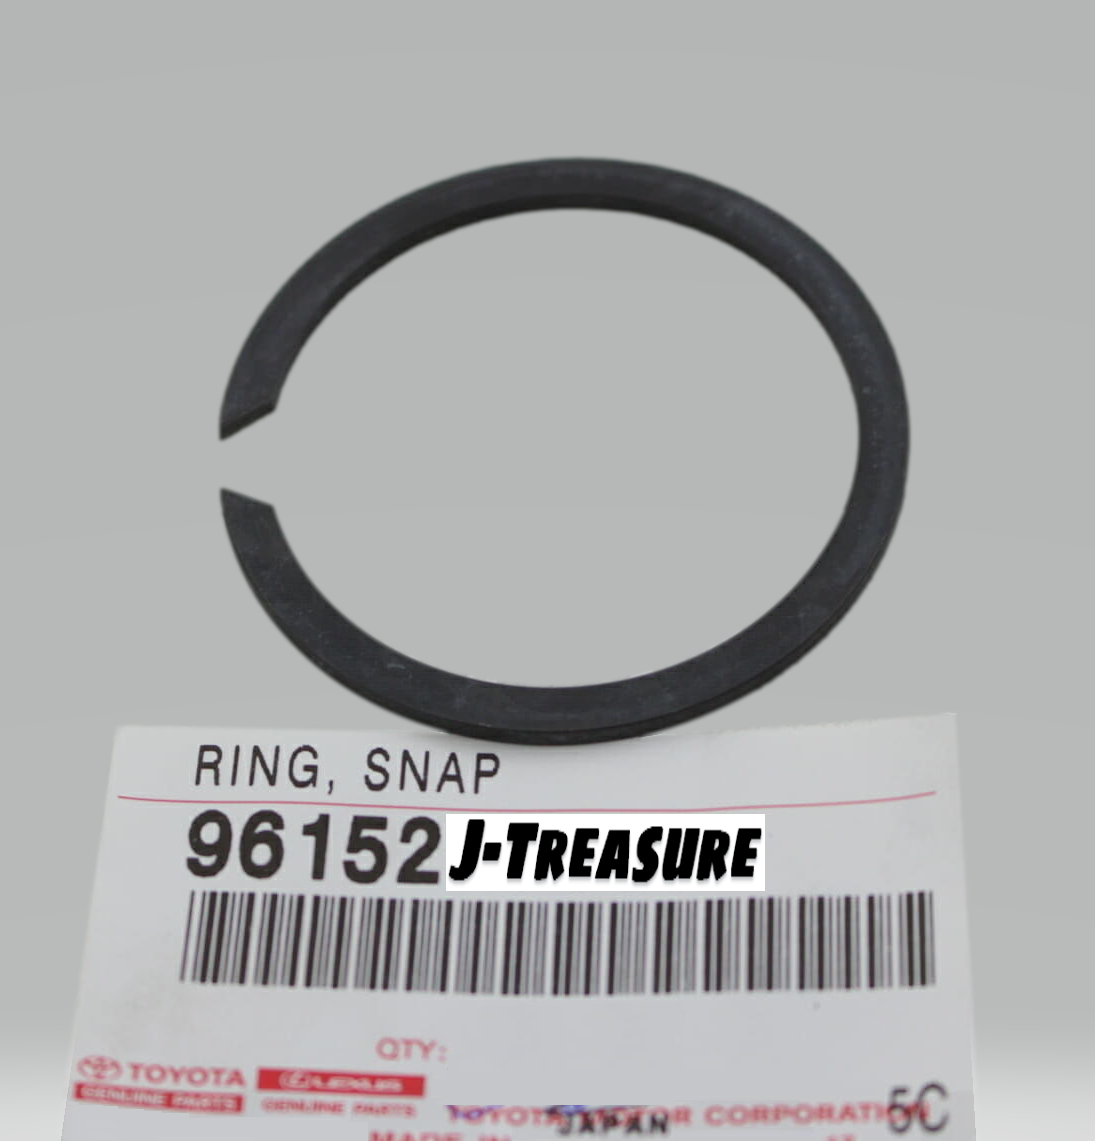 TOYOTA SUPRA JZA80 93-98 Genuine 6-Speed Clutch Disk Cover Bearing Snap ring Set